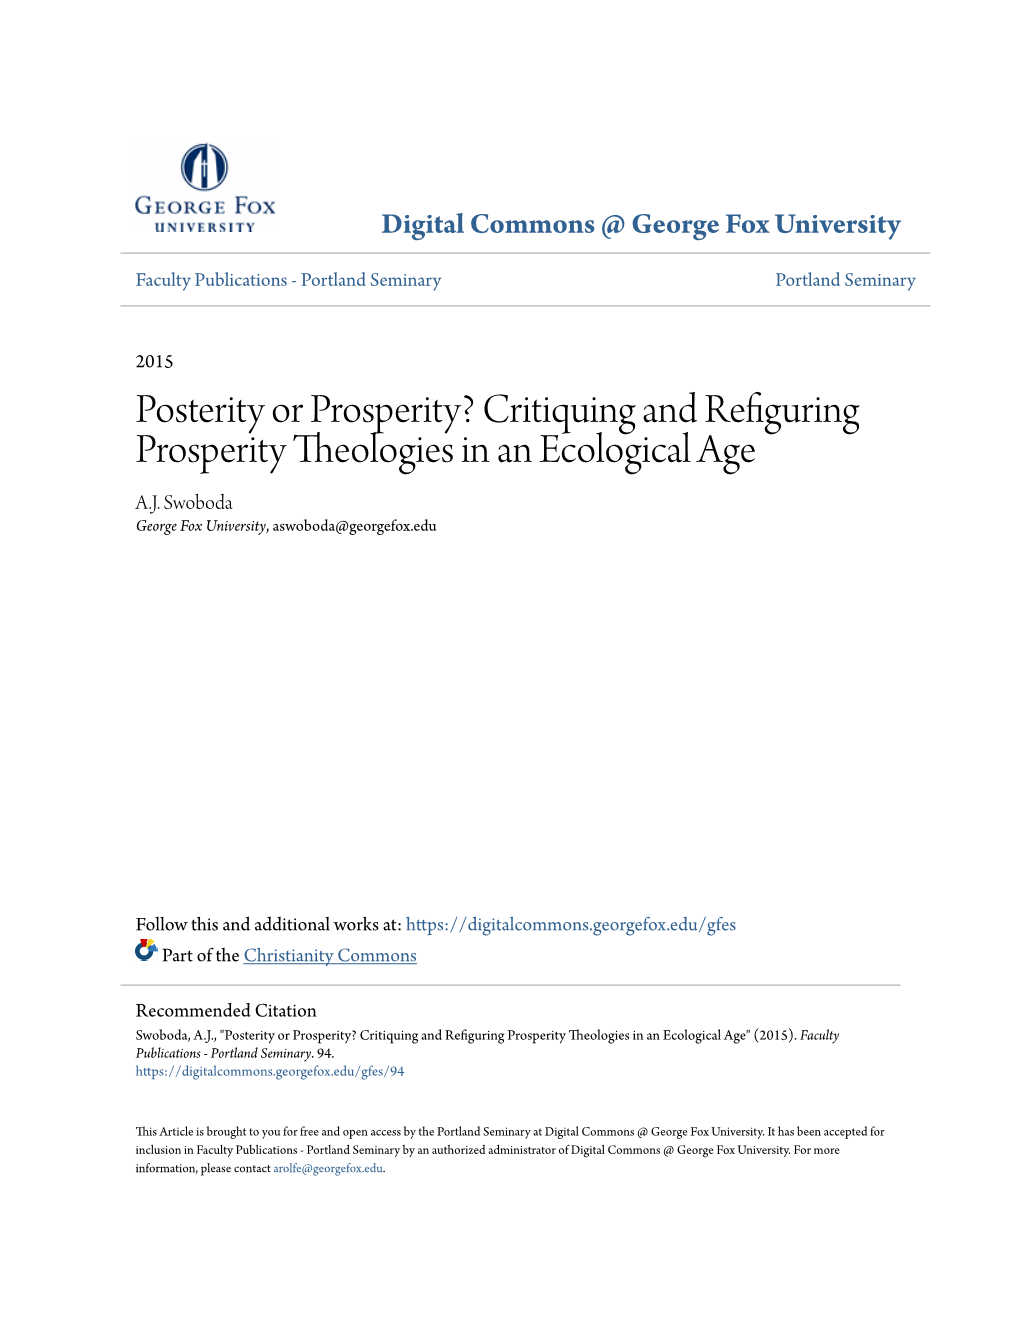 Posterity Or Prosperity? Critiquing and Refiguring Prosperity Theologies in an Ecological Age A.J